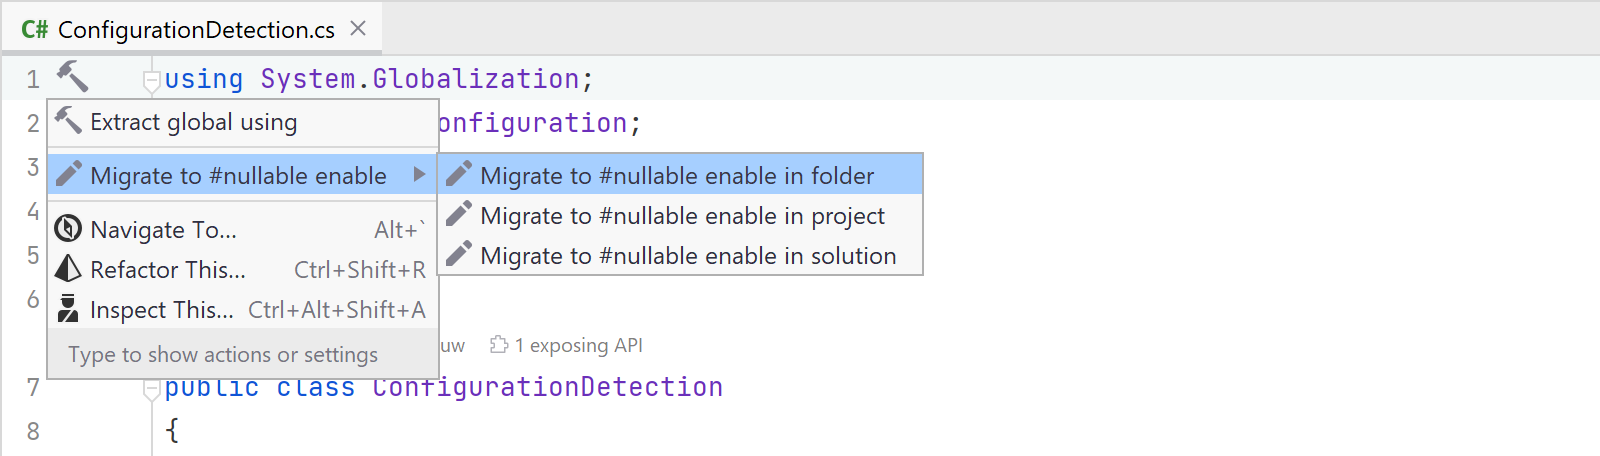 Migrate to #nullable enable